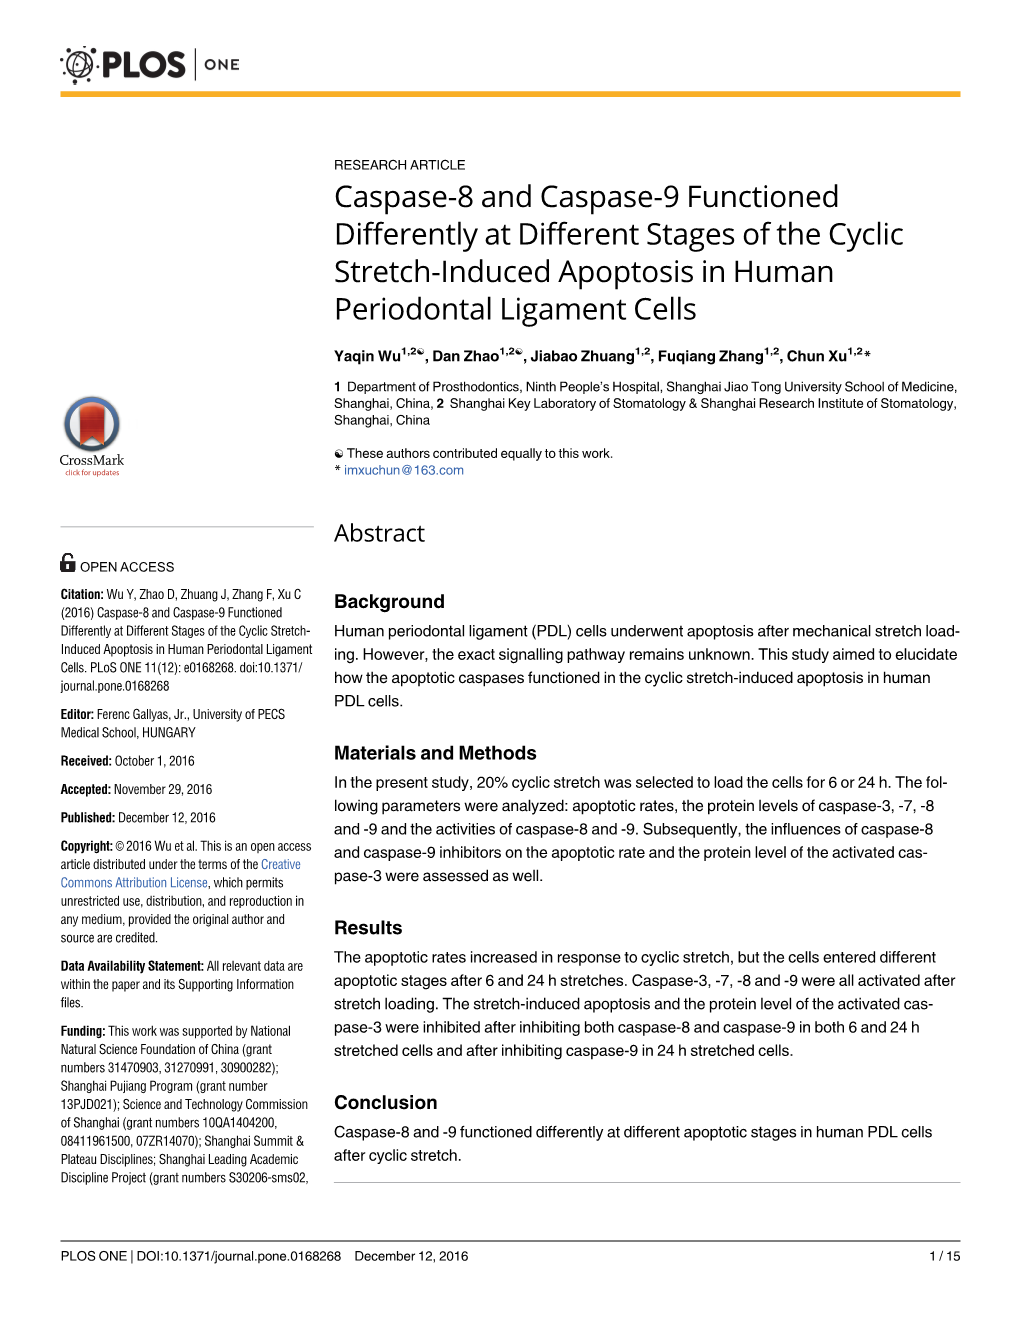 Caspase-8 and Caspase-9 Functioned Differently at Different Stages of the Cyclic Stretch-Induced Apoptosis in Human Periodontal Ligament Cells